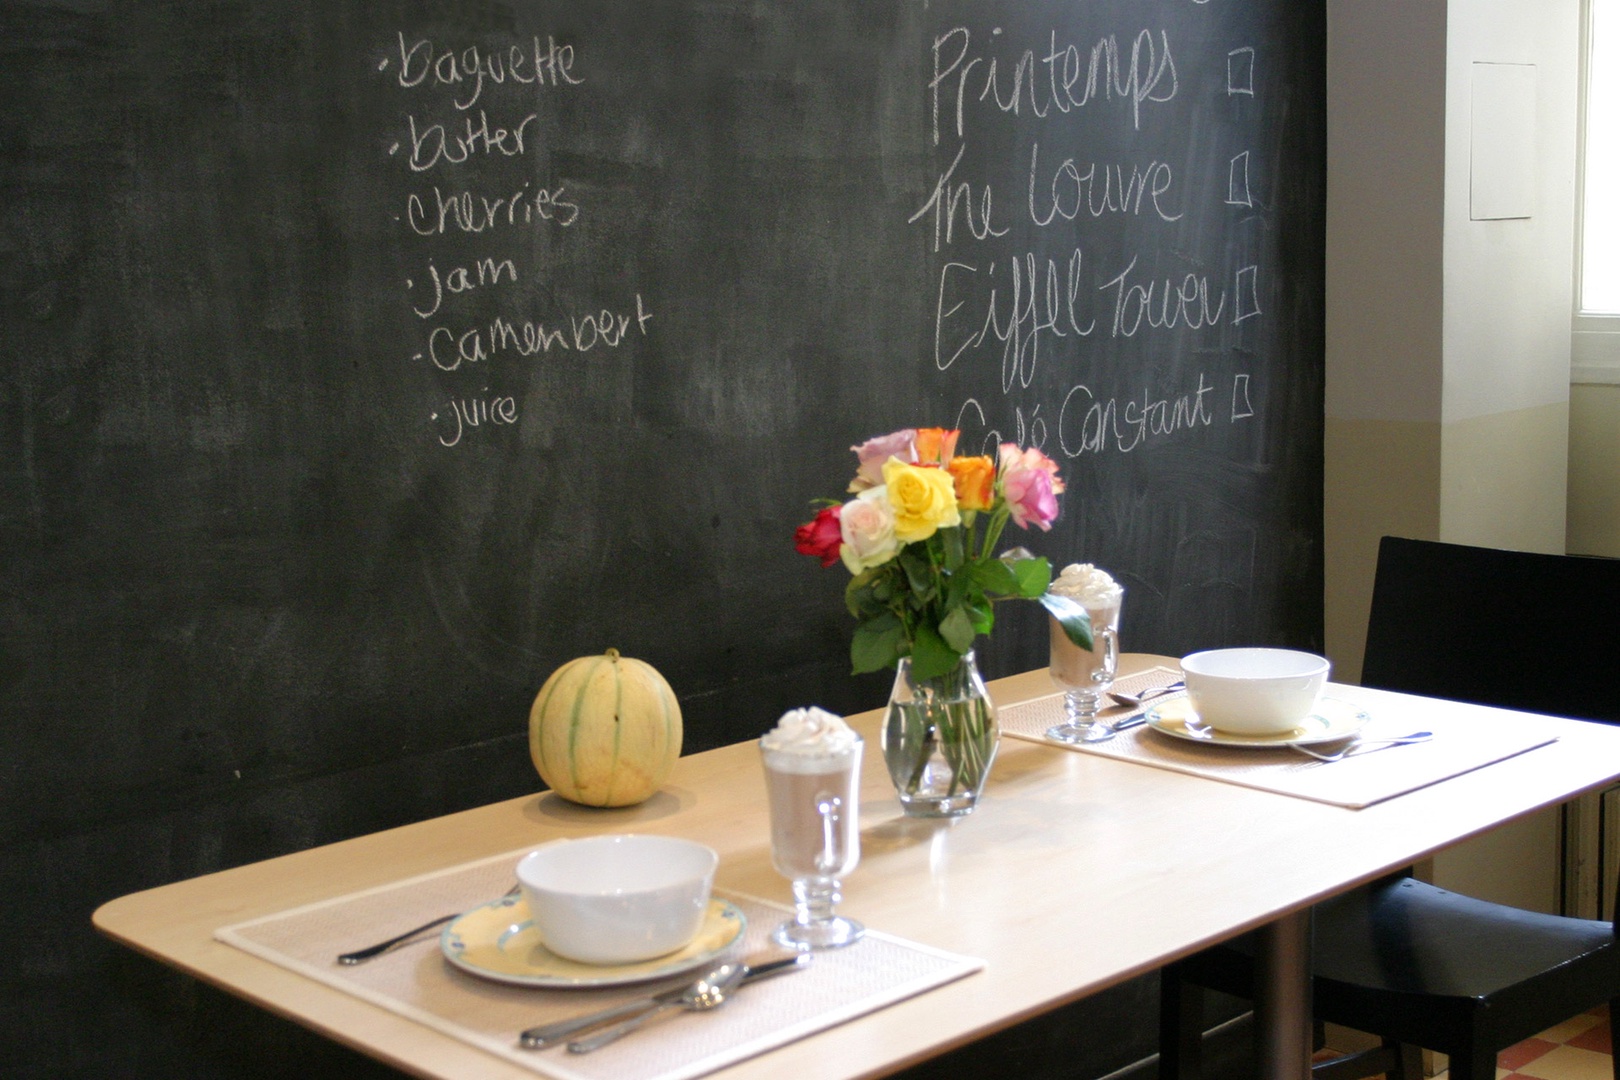 Plan your days on the kitchen blackboard behind the table.